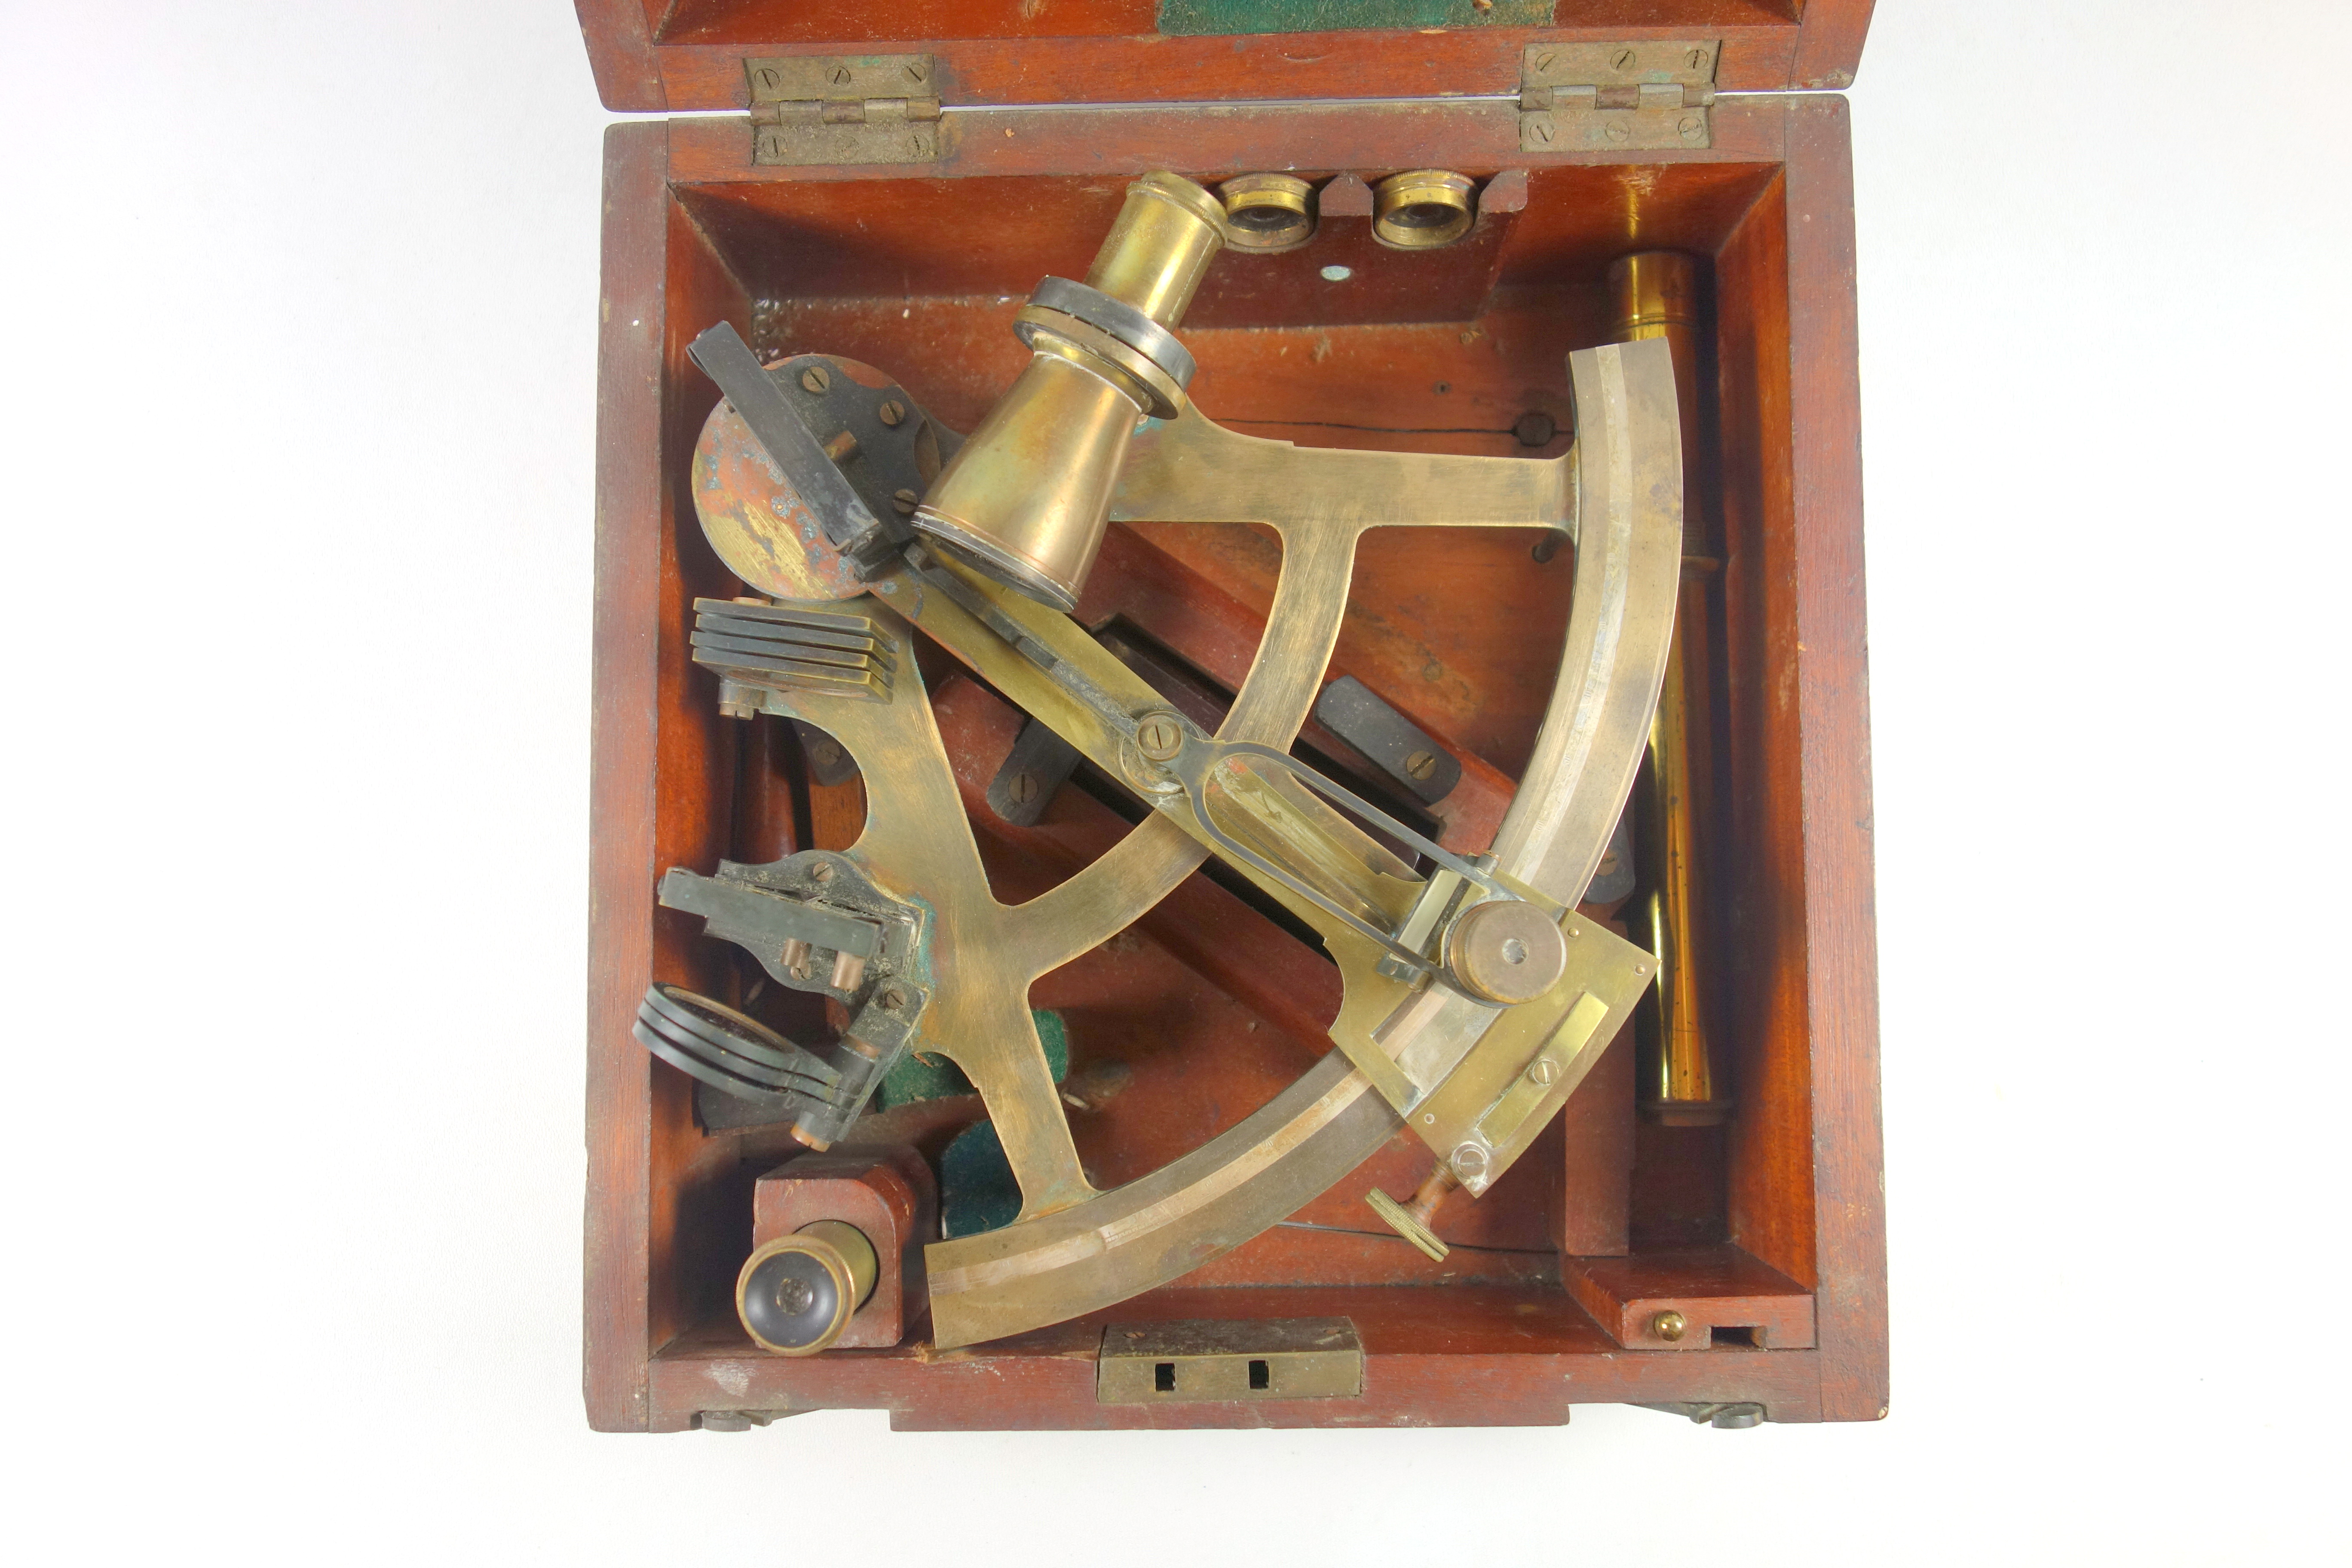 Edwardian 6 1/2 inch radius brass sextant by William Cary, London, in mahogany case with certificate - Image 2 of 6